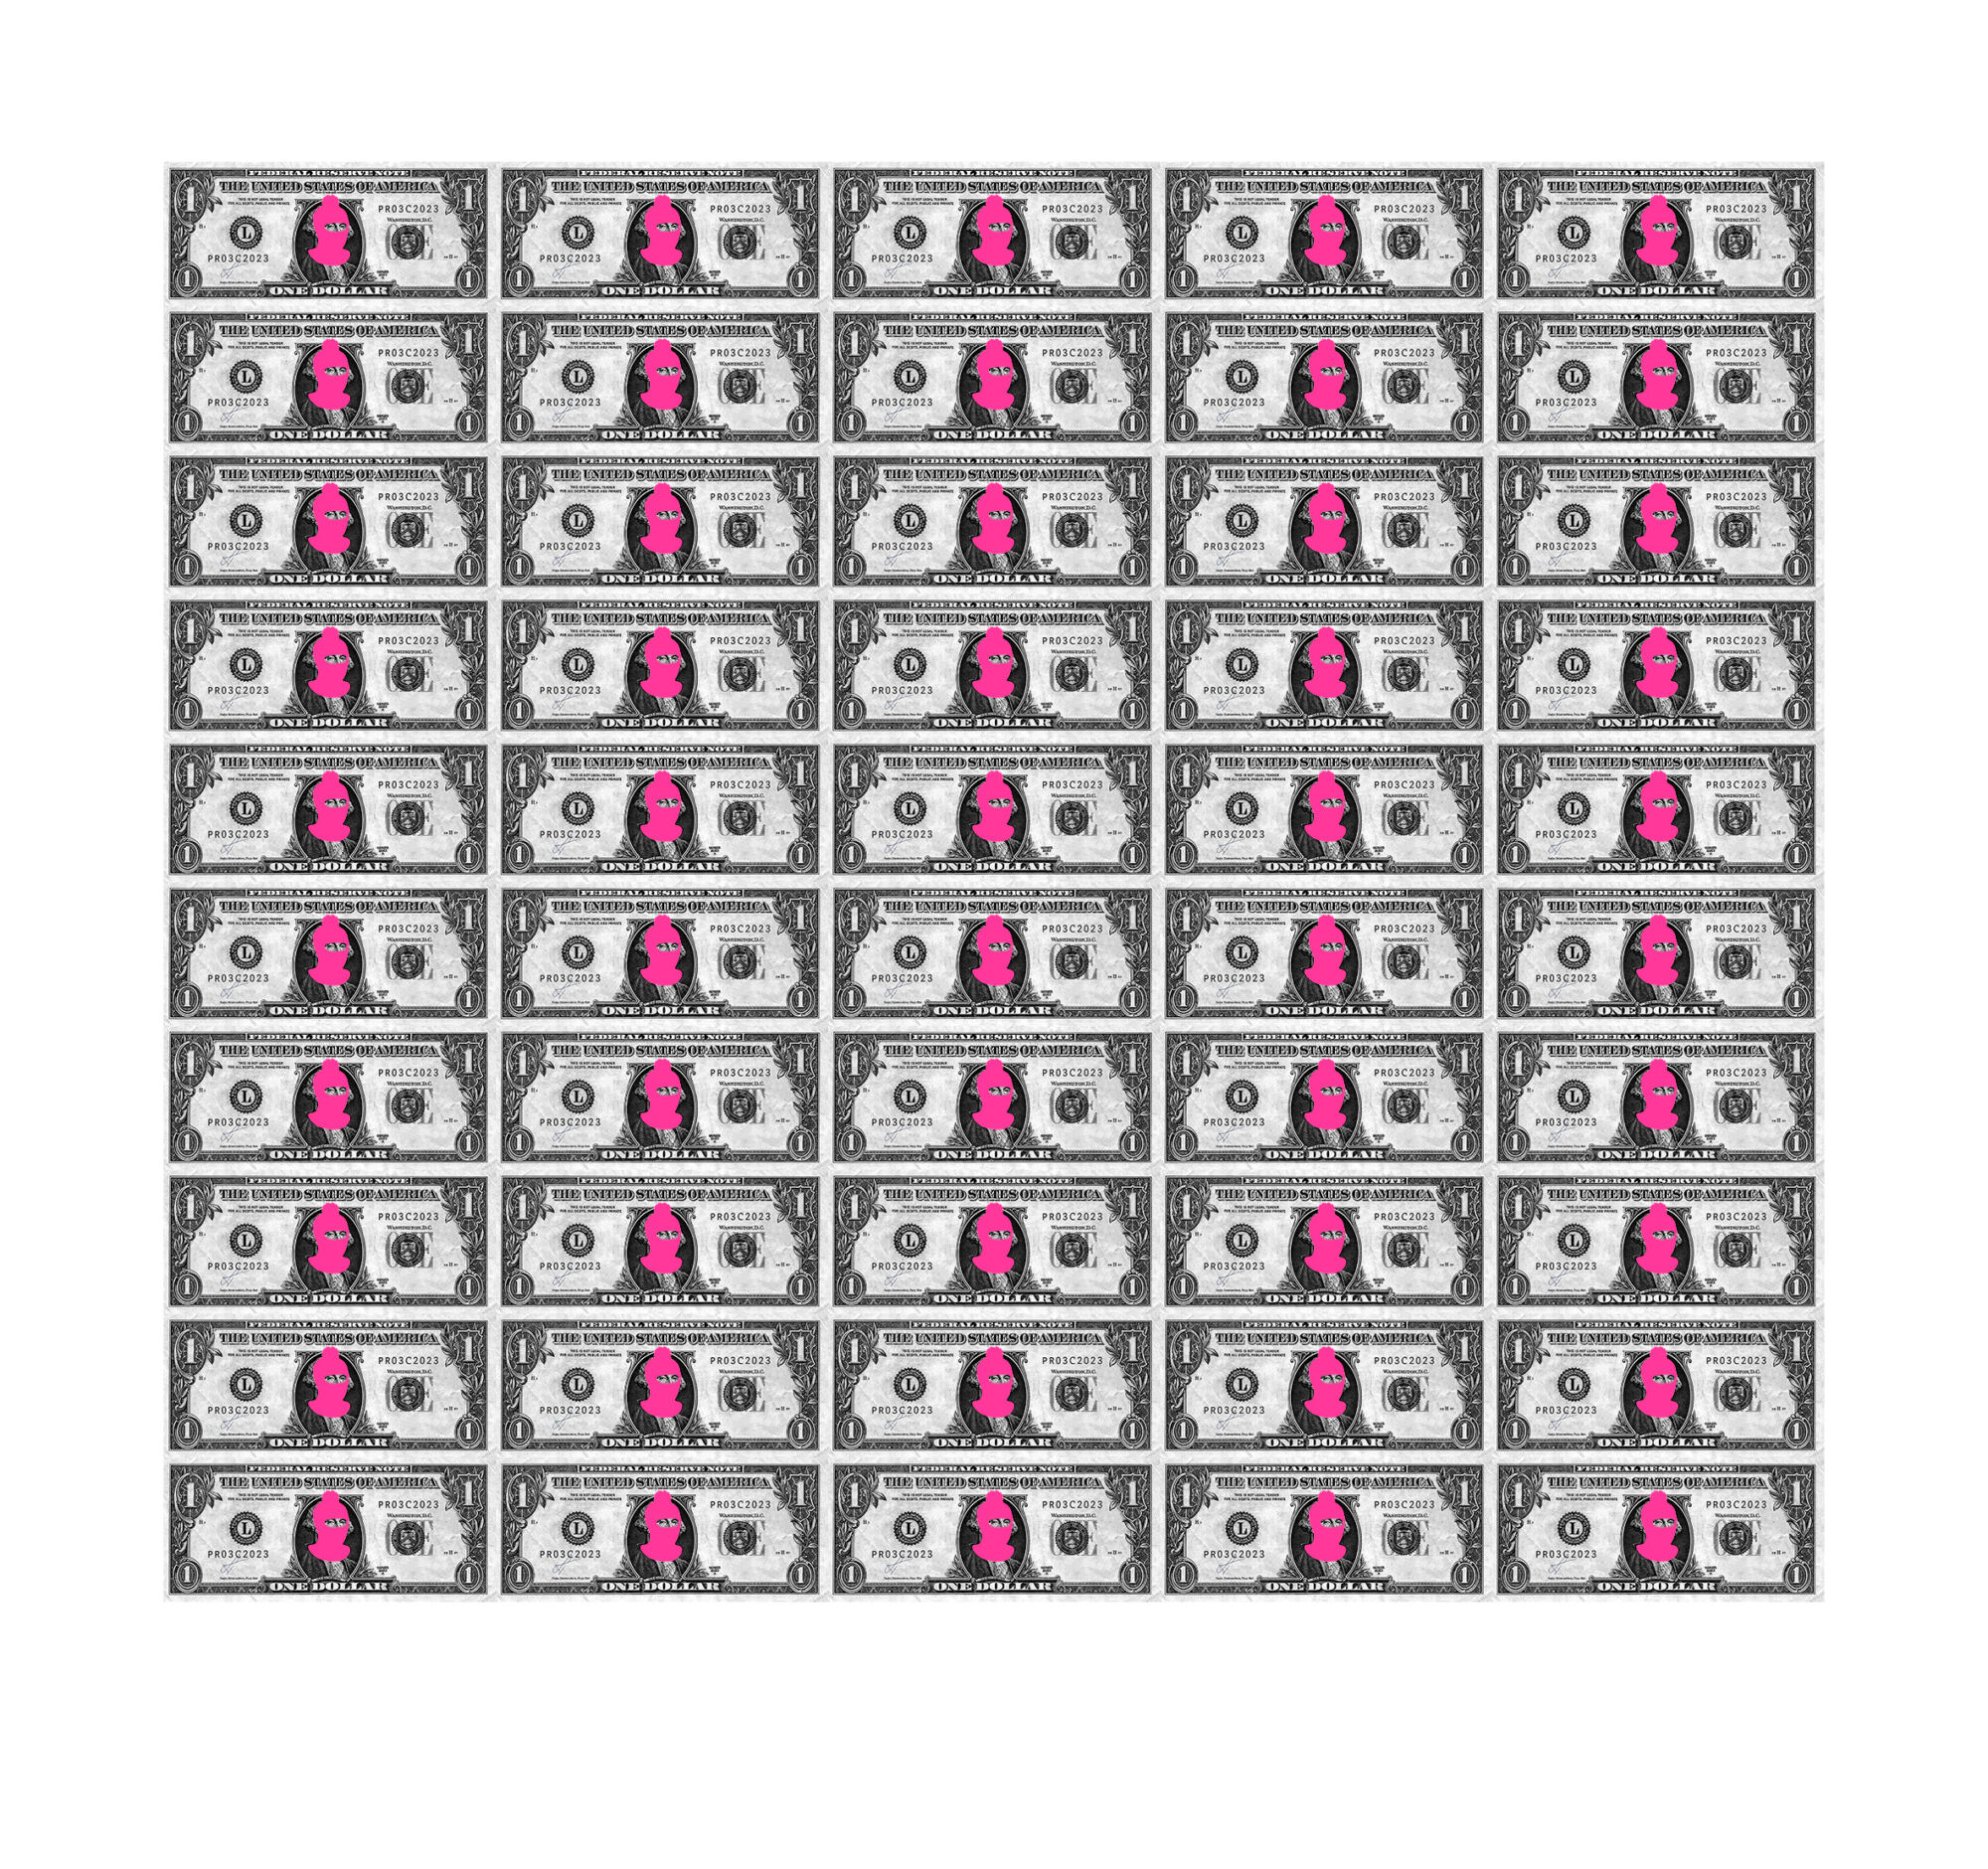 The Wick - ‘50 One Dollar Bills‘ by Pussy Riot (Nadya Tolokonnikova). Edition of 51, Hand-signed and numbered by the artist, 2-layer screen print on Somerset paper, 940mm x 1,000mm (Unframed) £1,312 excl. VAT